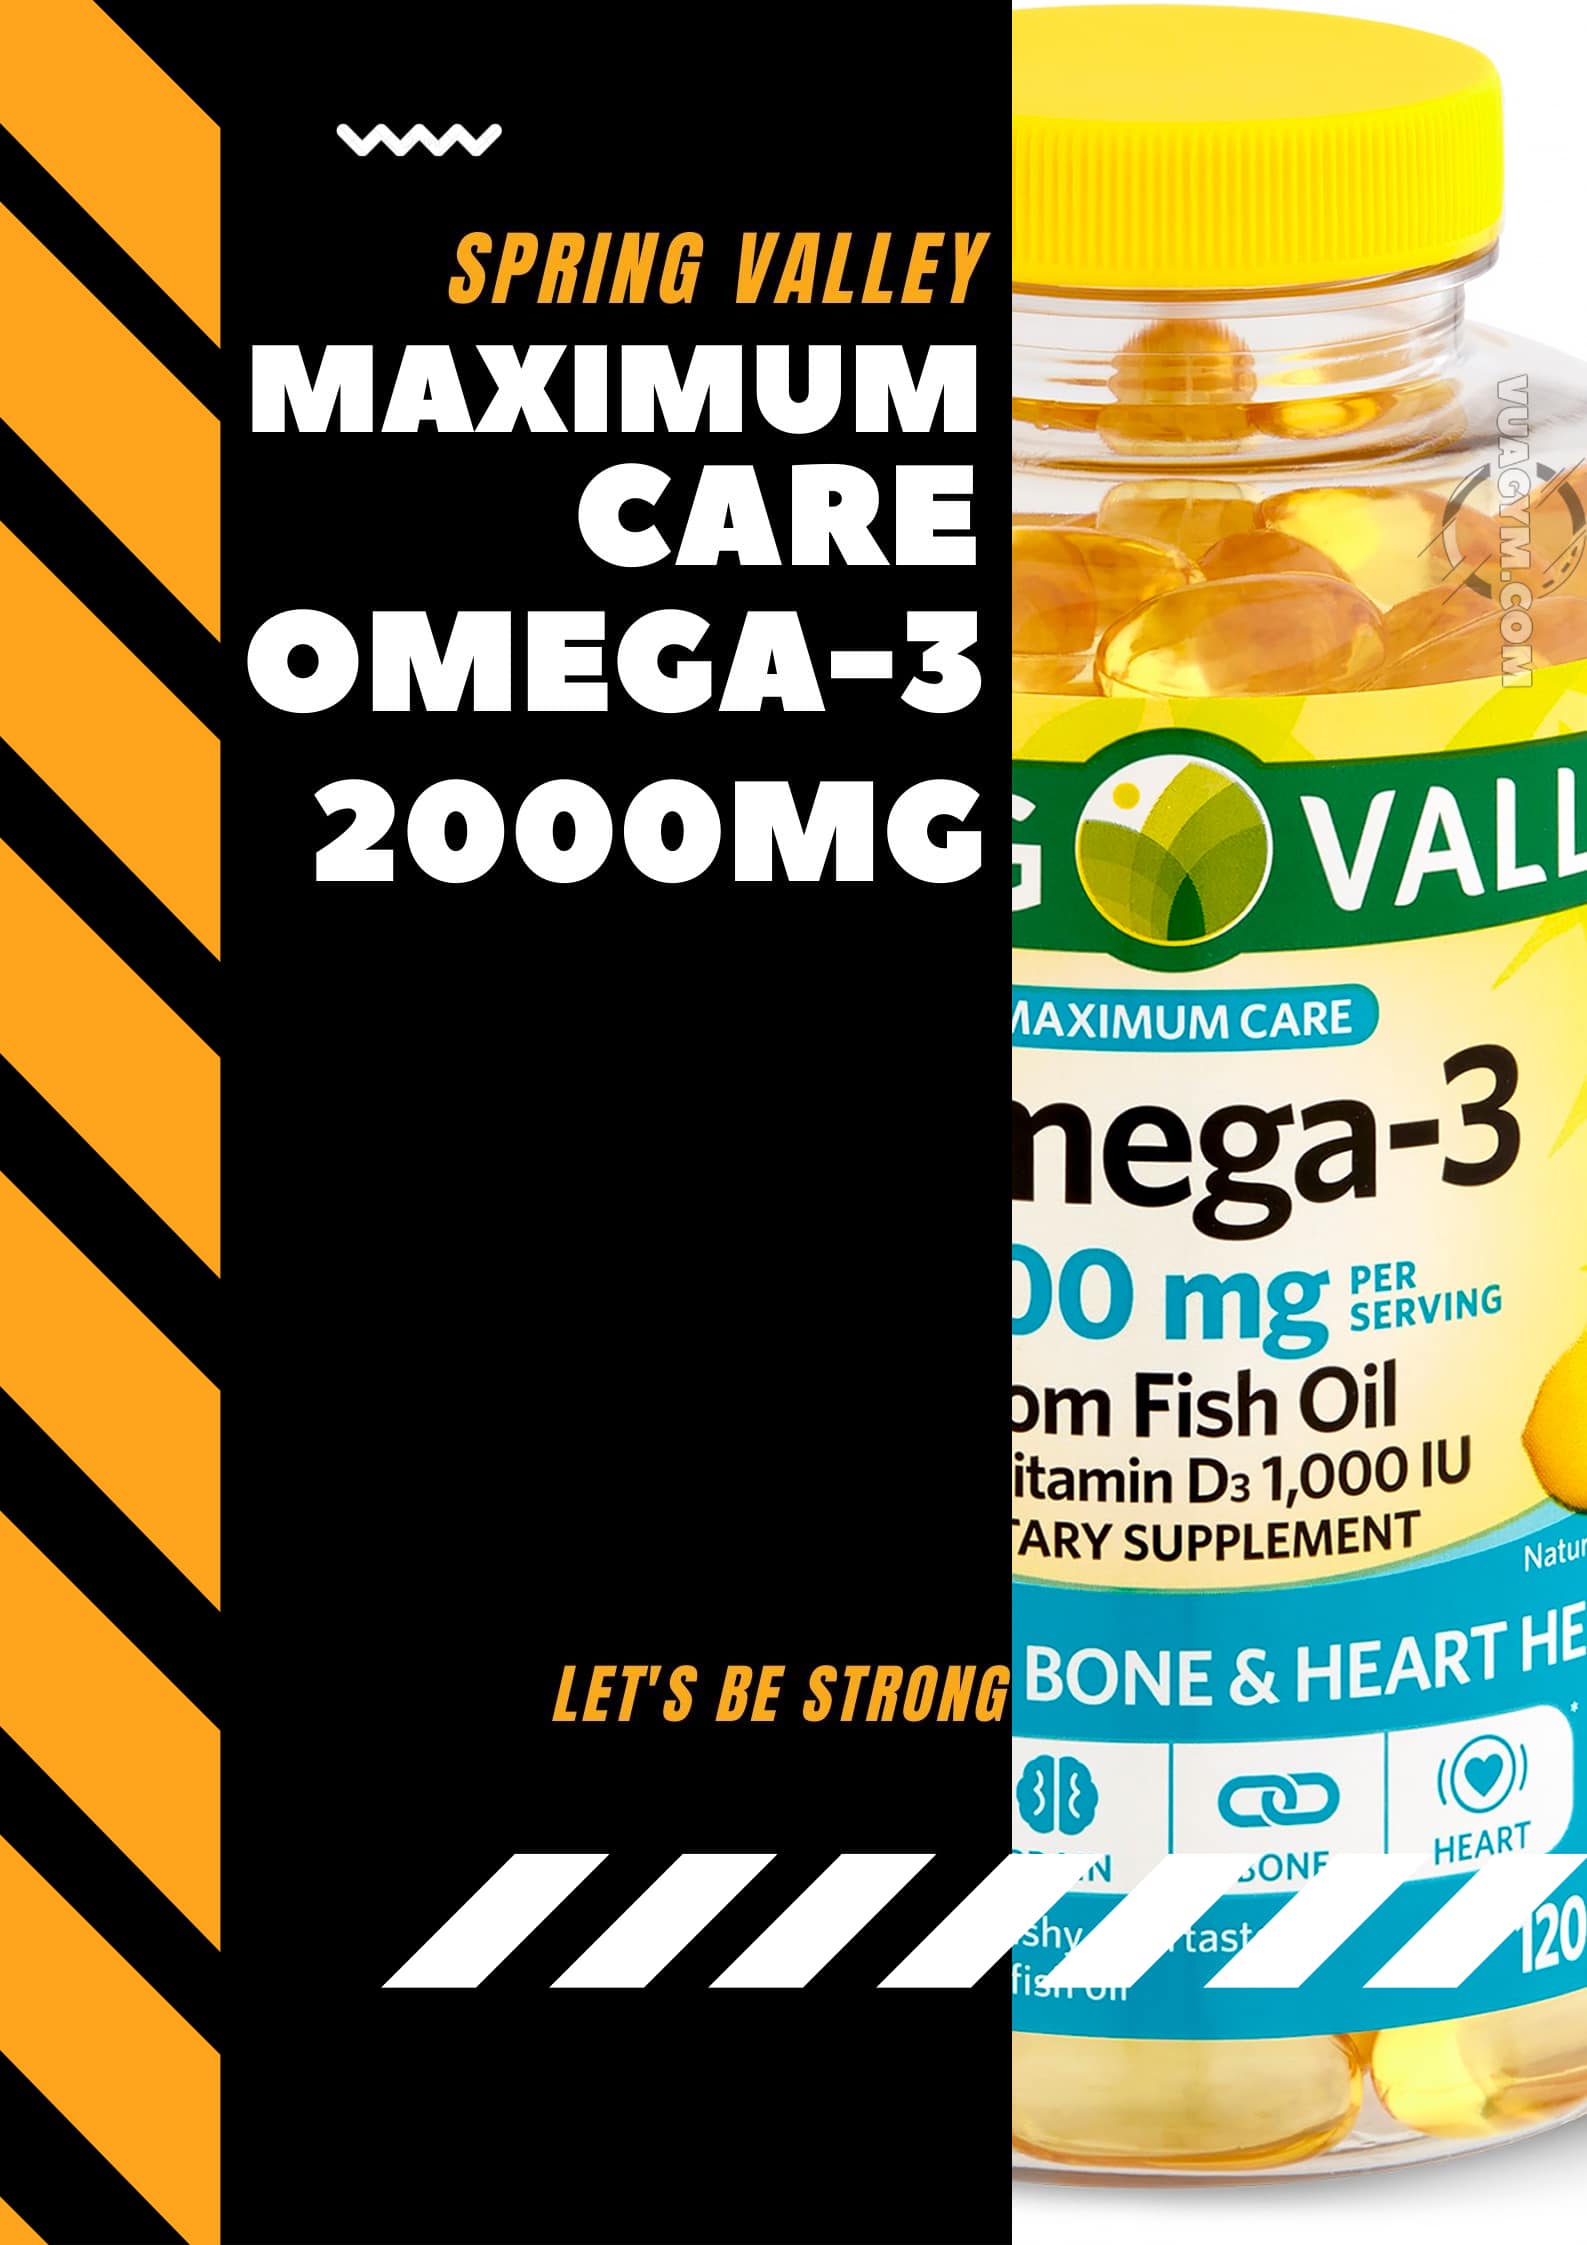 Spring Valley - Maximum Care Omega-3 2000mg from Fish Oil (180 viên) -